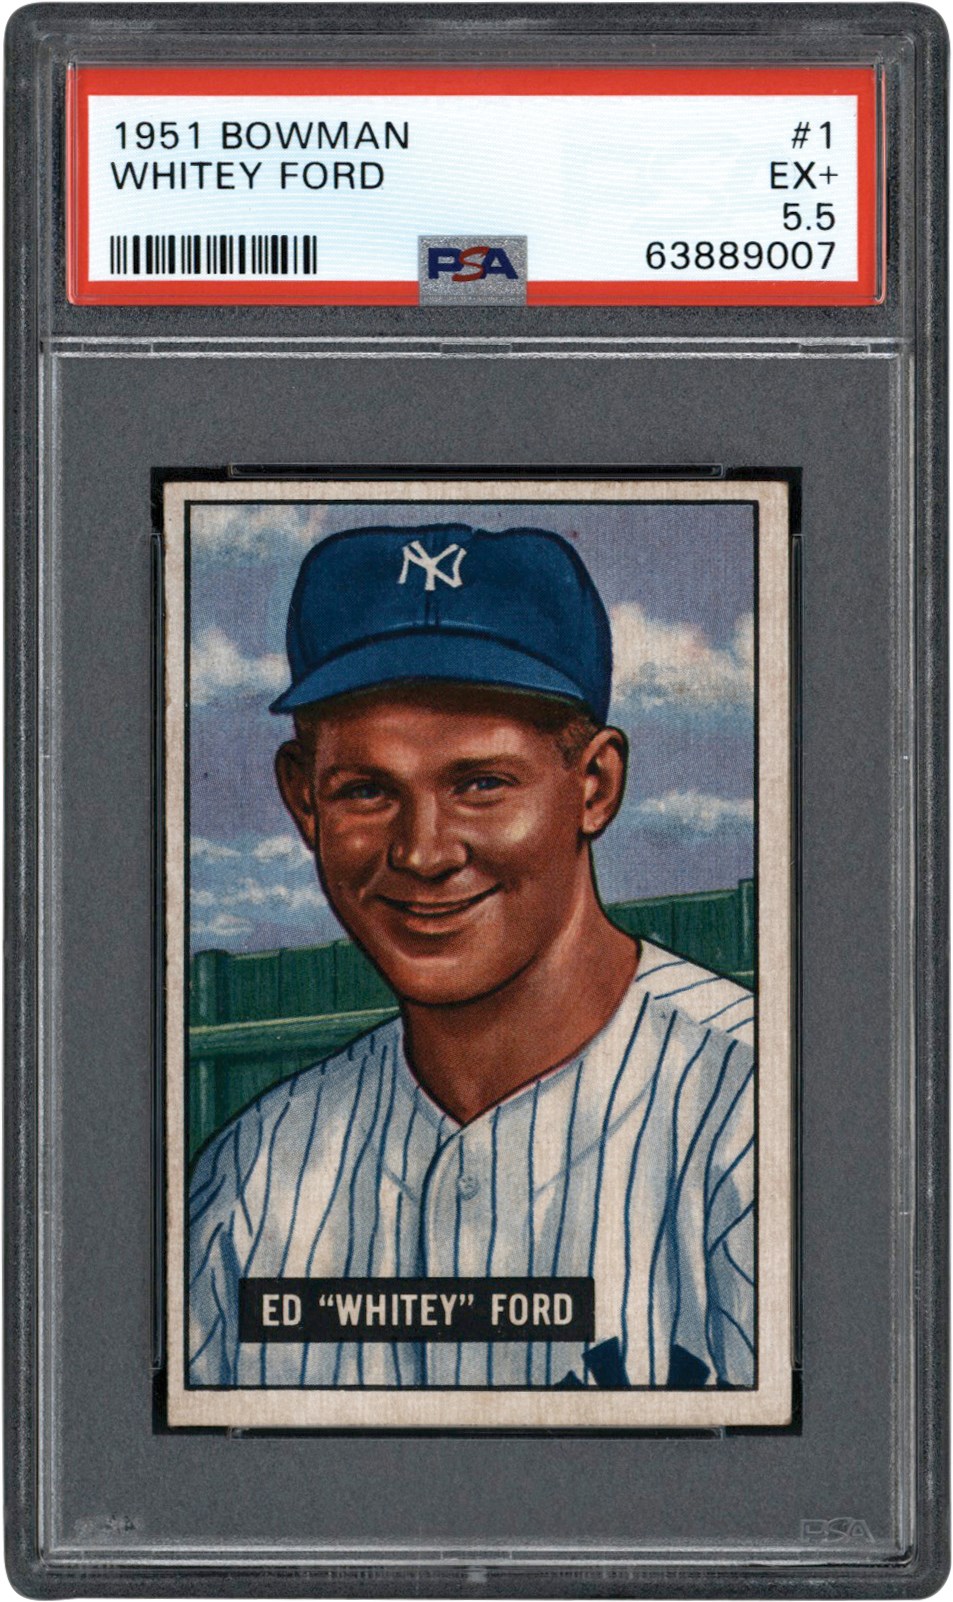 - 1951 Bowman #1 Whitey Ford Rookie PSA EX+ 5.5 - Newly Discovered Example